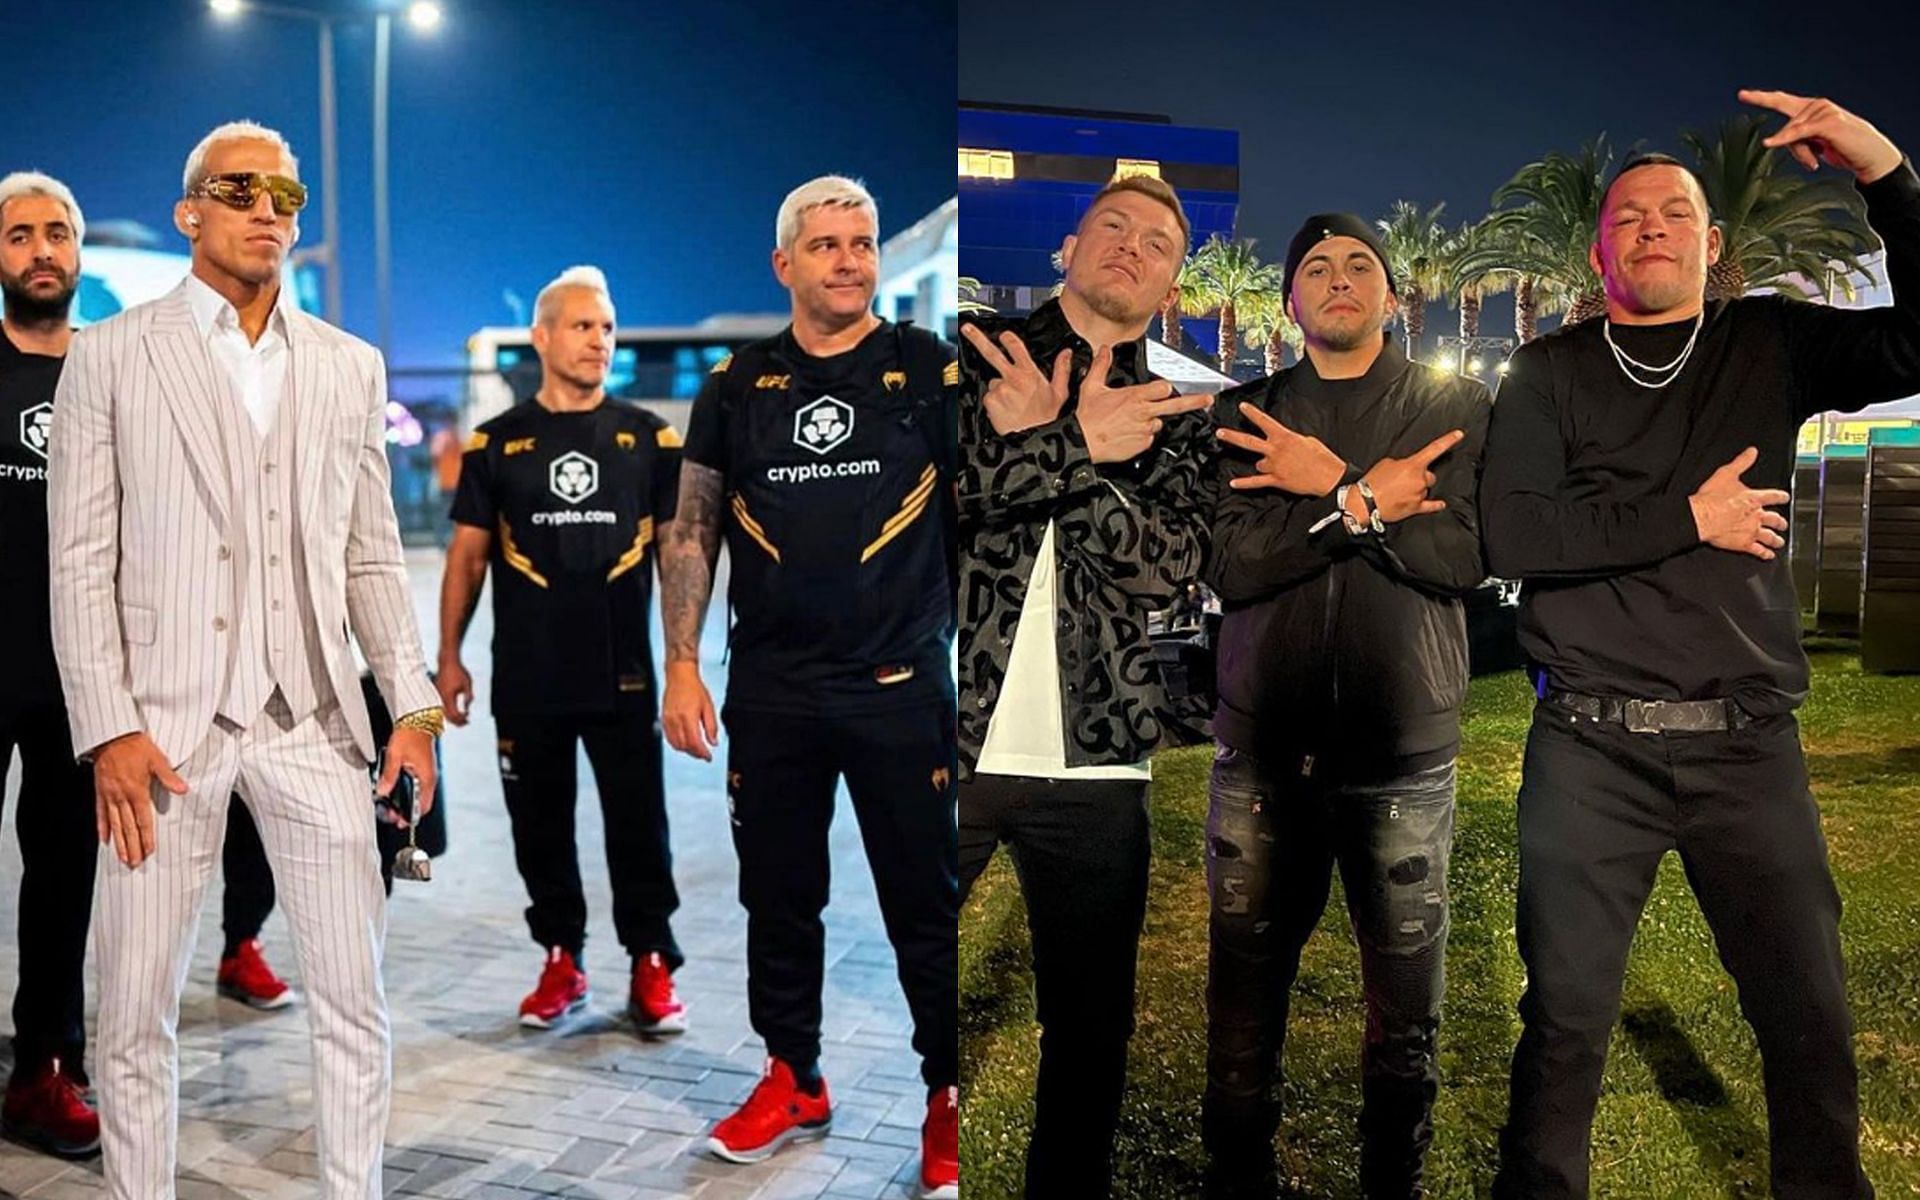 Charles Oliveira with his team (left) and Nate Diaz with his team (right) (Images via @charlesdobronxs and @natediaz209 Instagram)